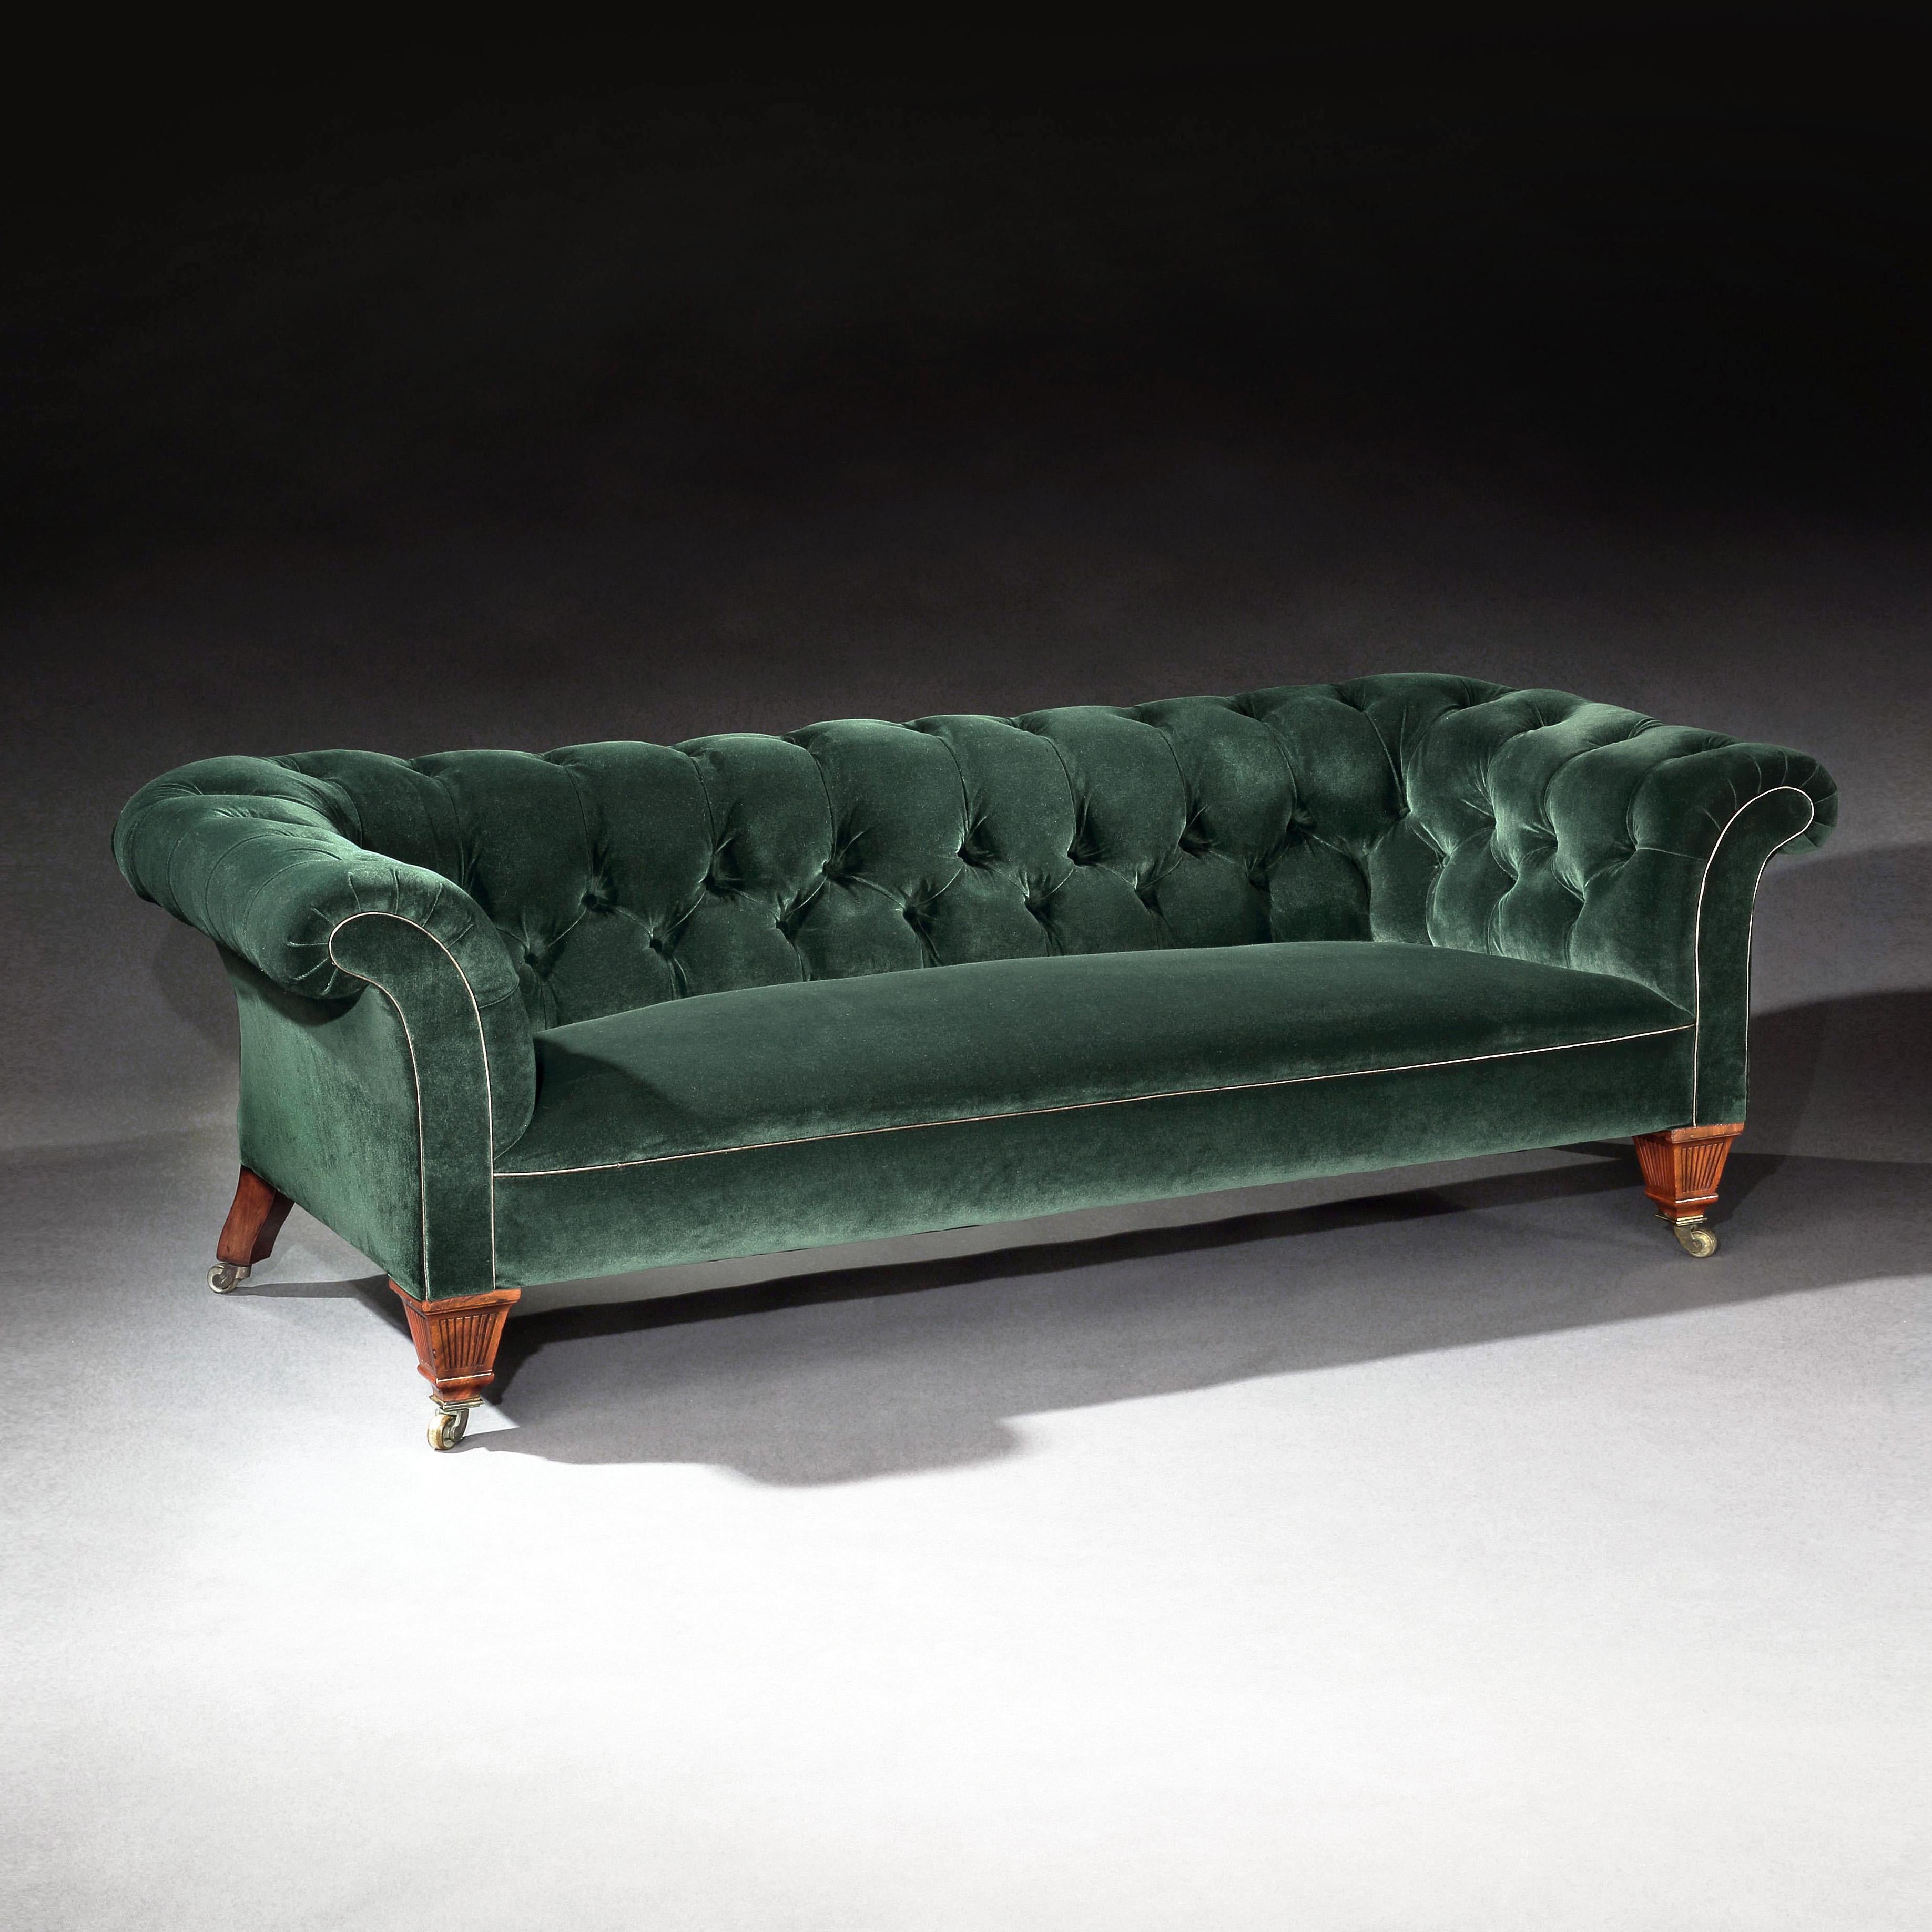 19th Century Victorian Chesterfield Sofa Upholstered in a Green Velvet C Hindley 1